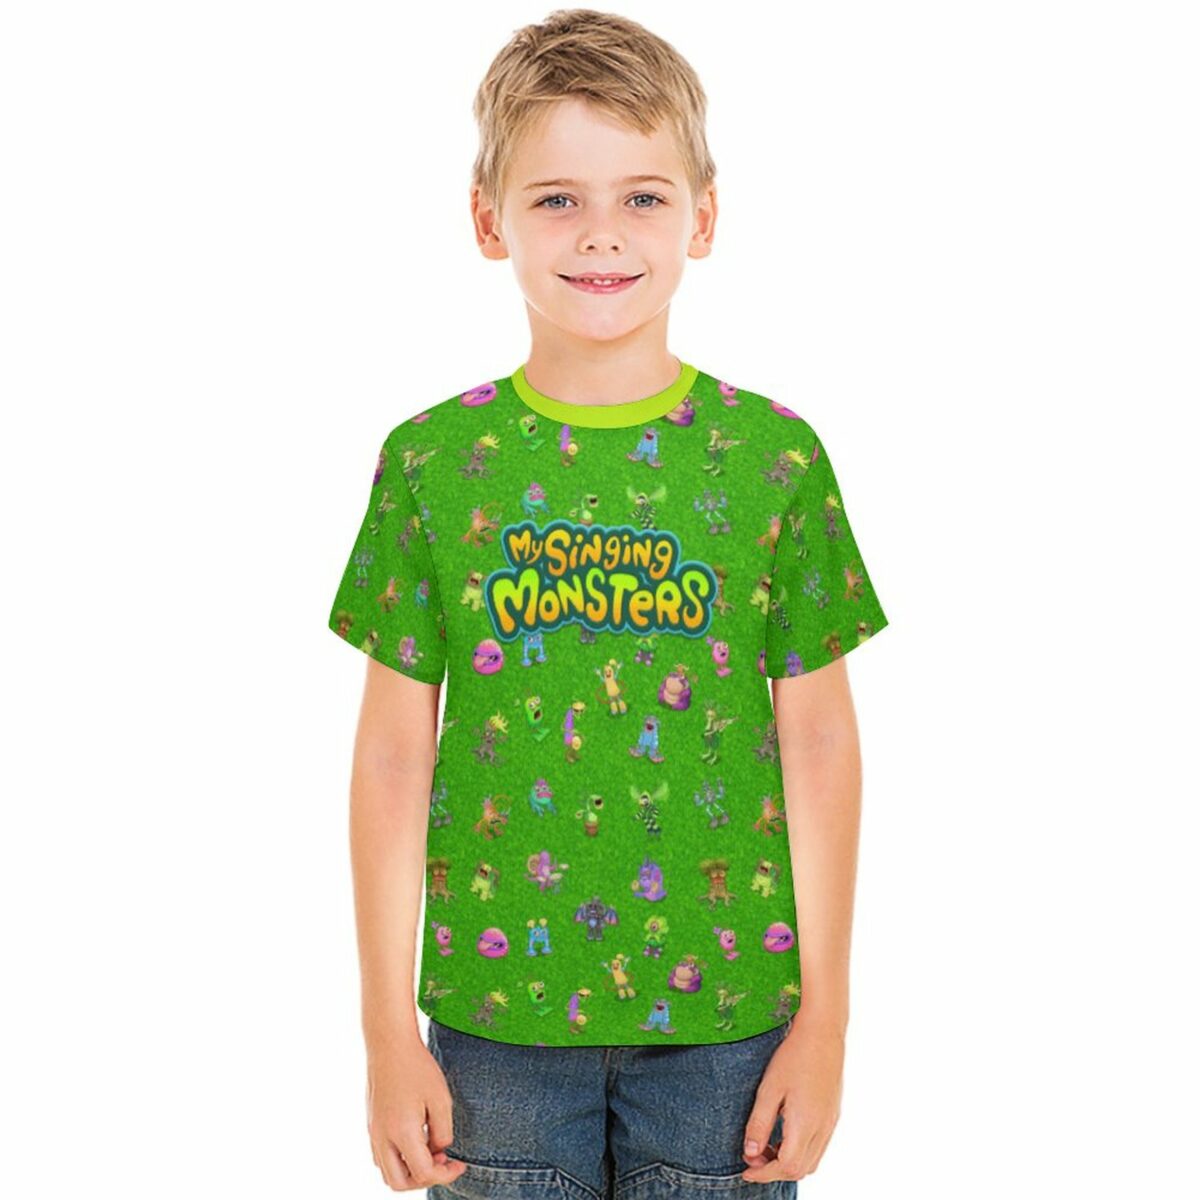 My Singing Monsters T-shirt for Teens (All-Over Printing) Cool Kiddo 24